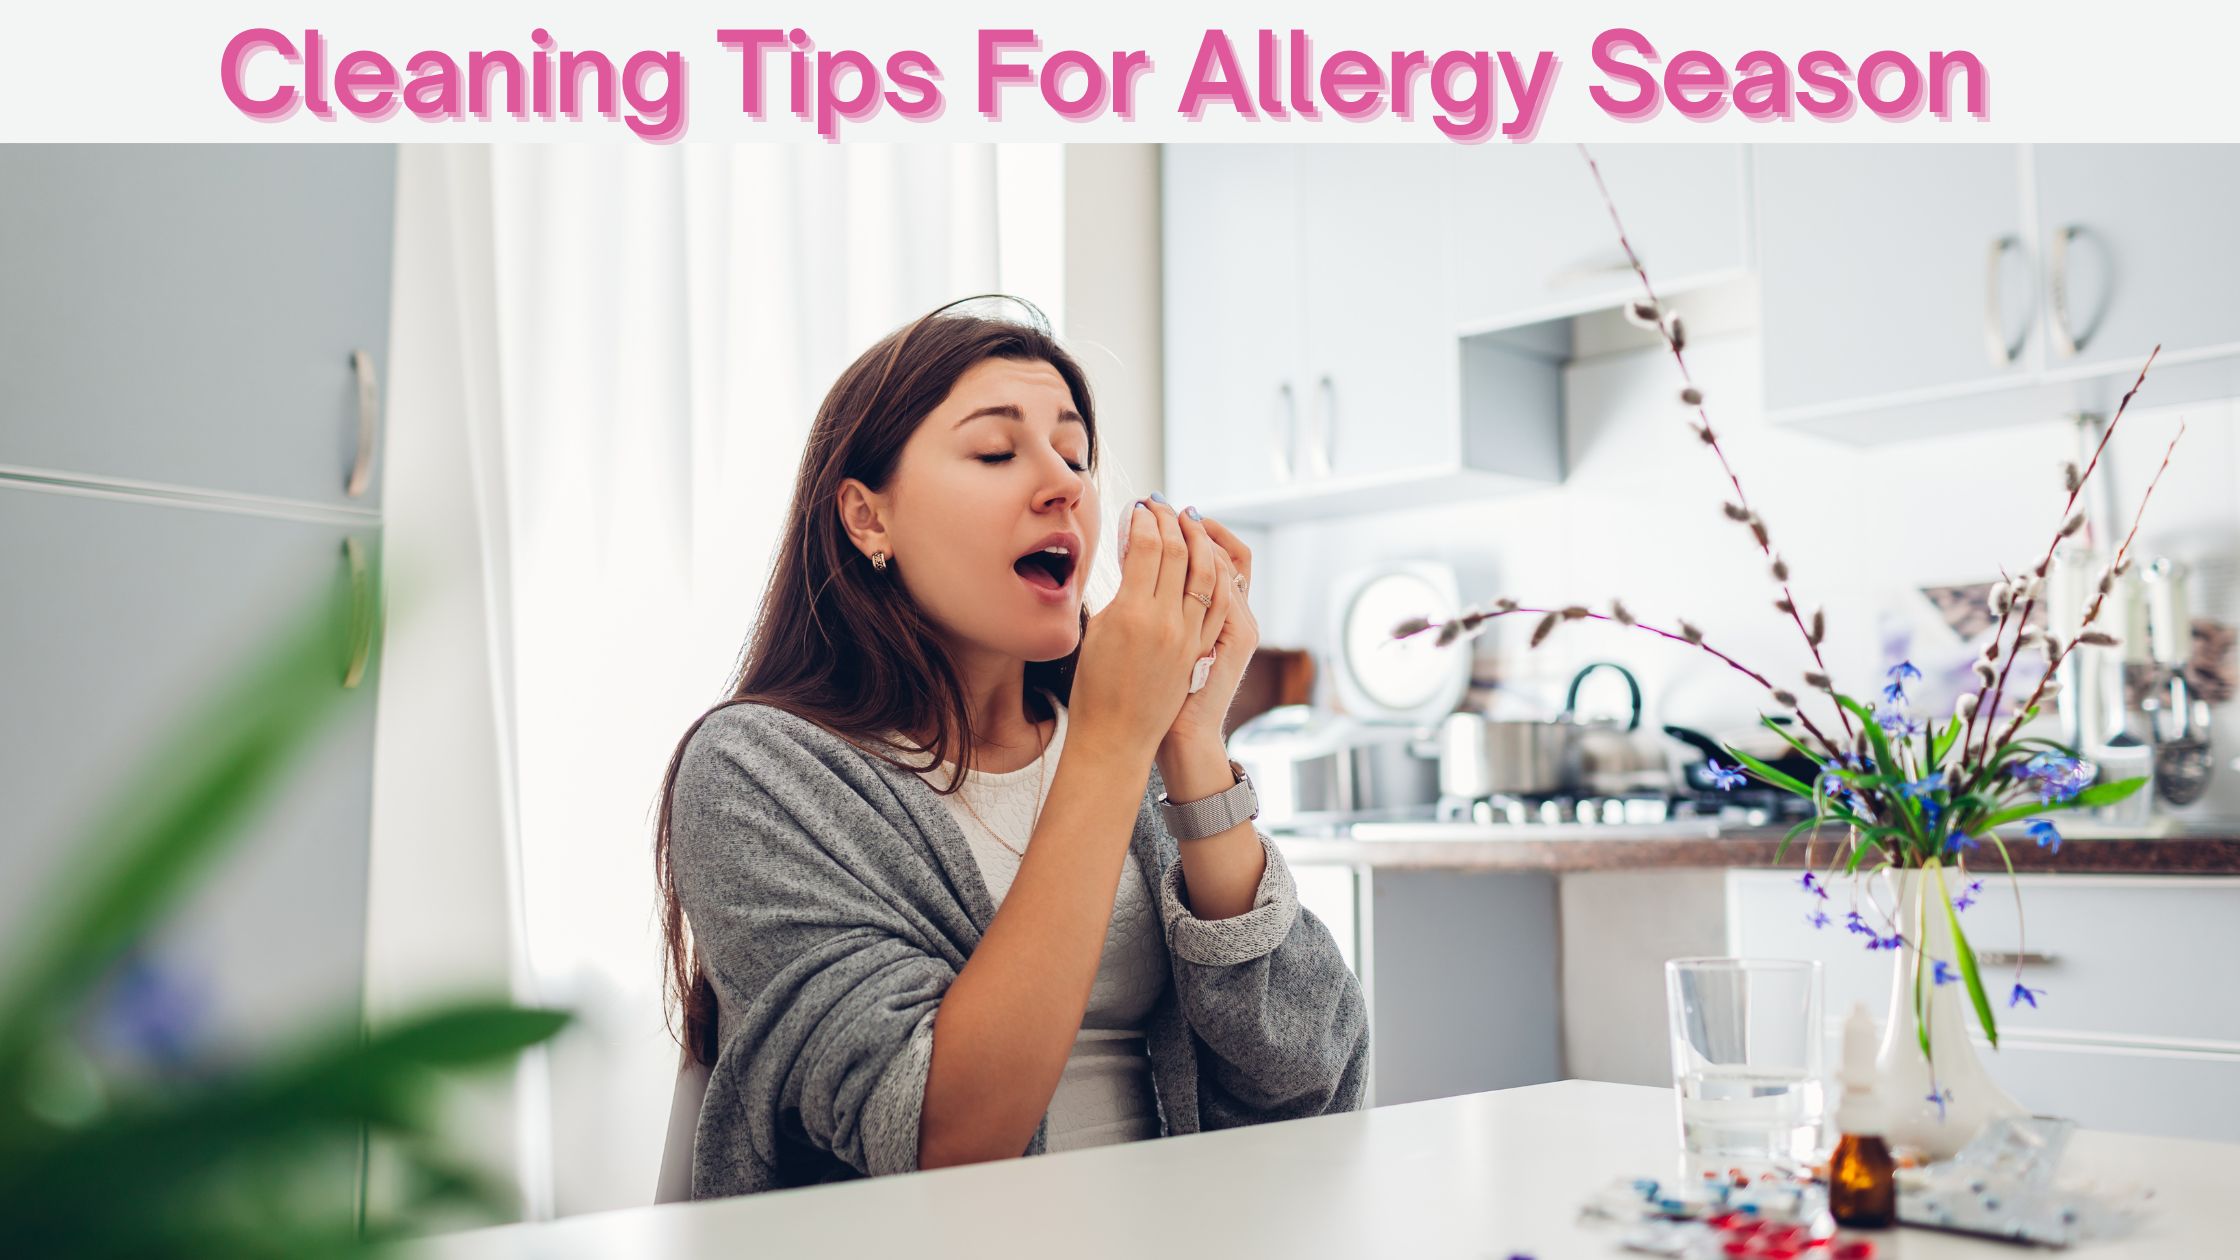 House Cleaning Can Help Reduce Allergy Symptoms